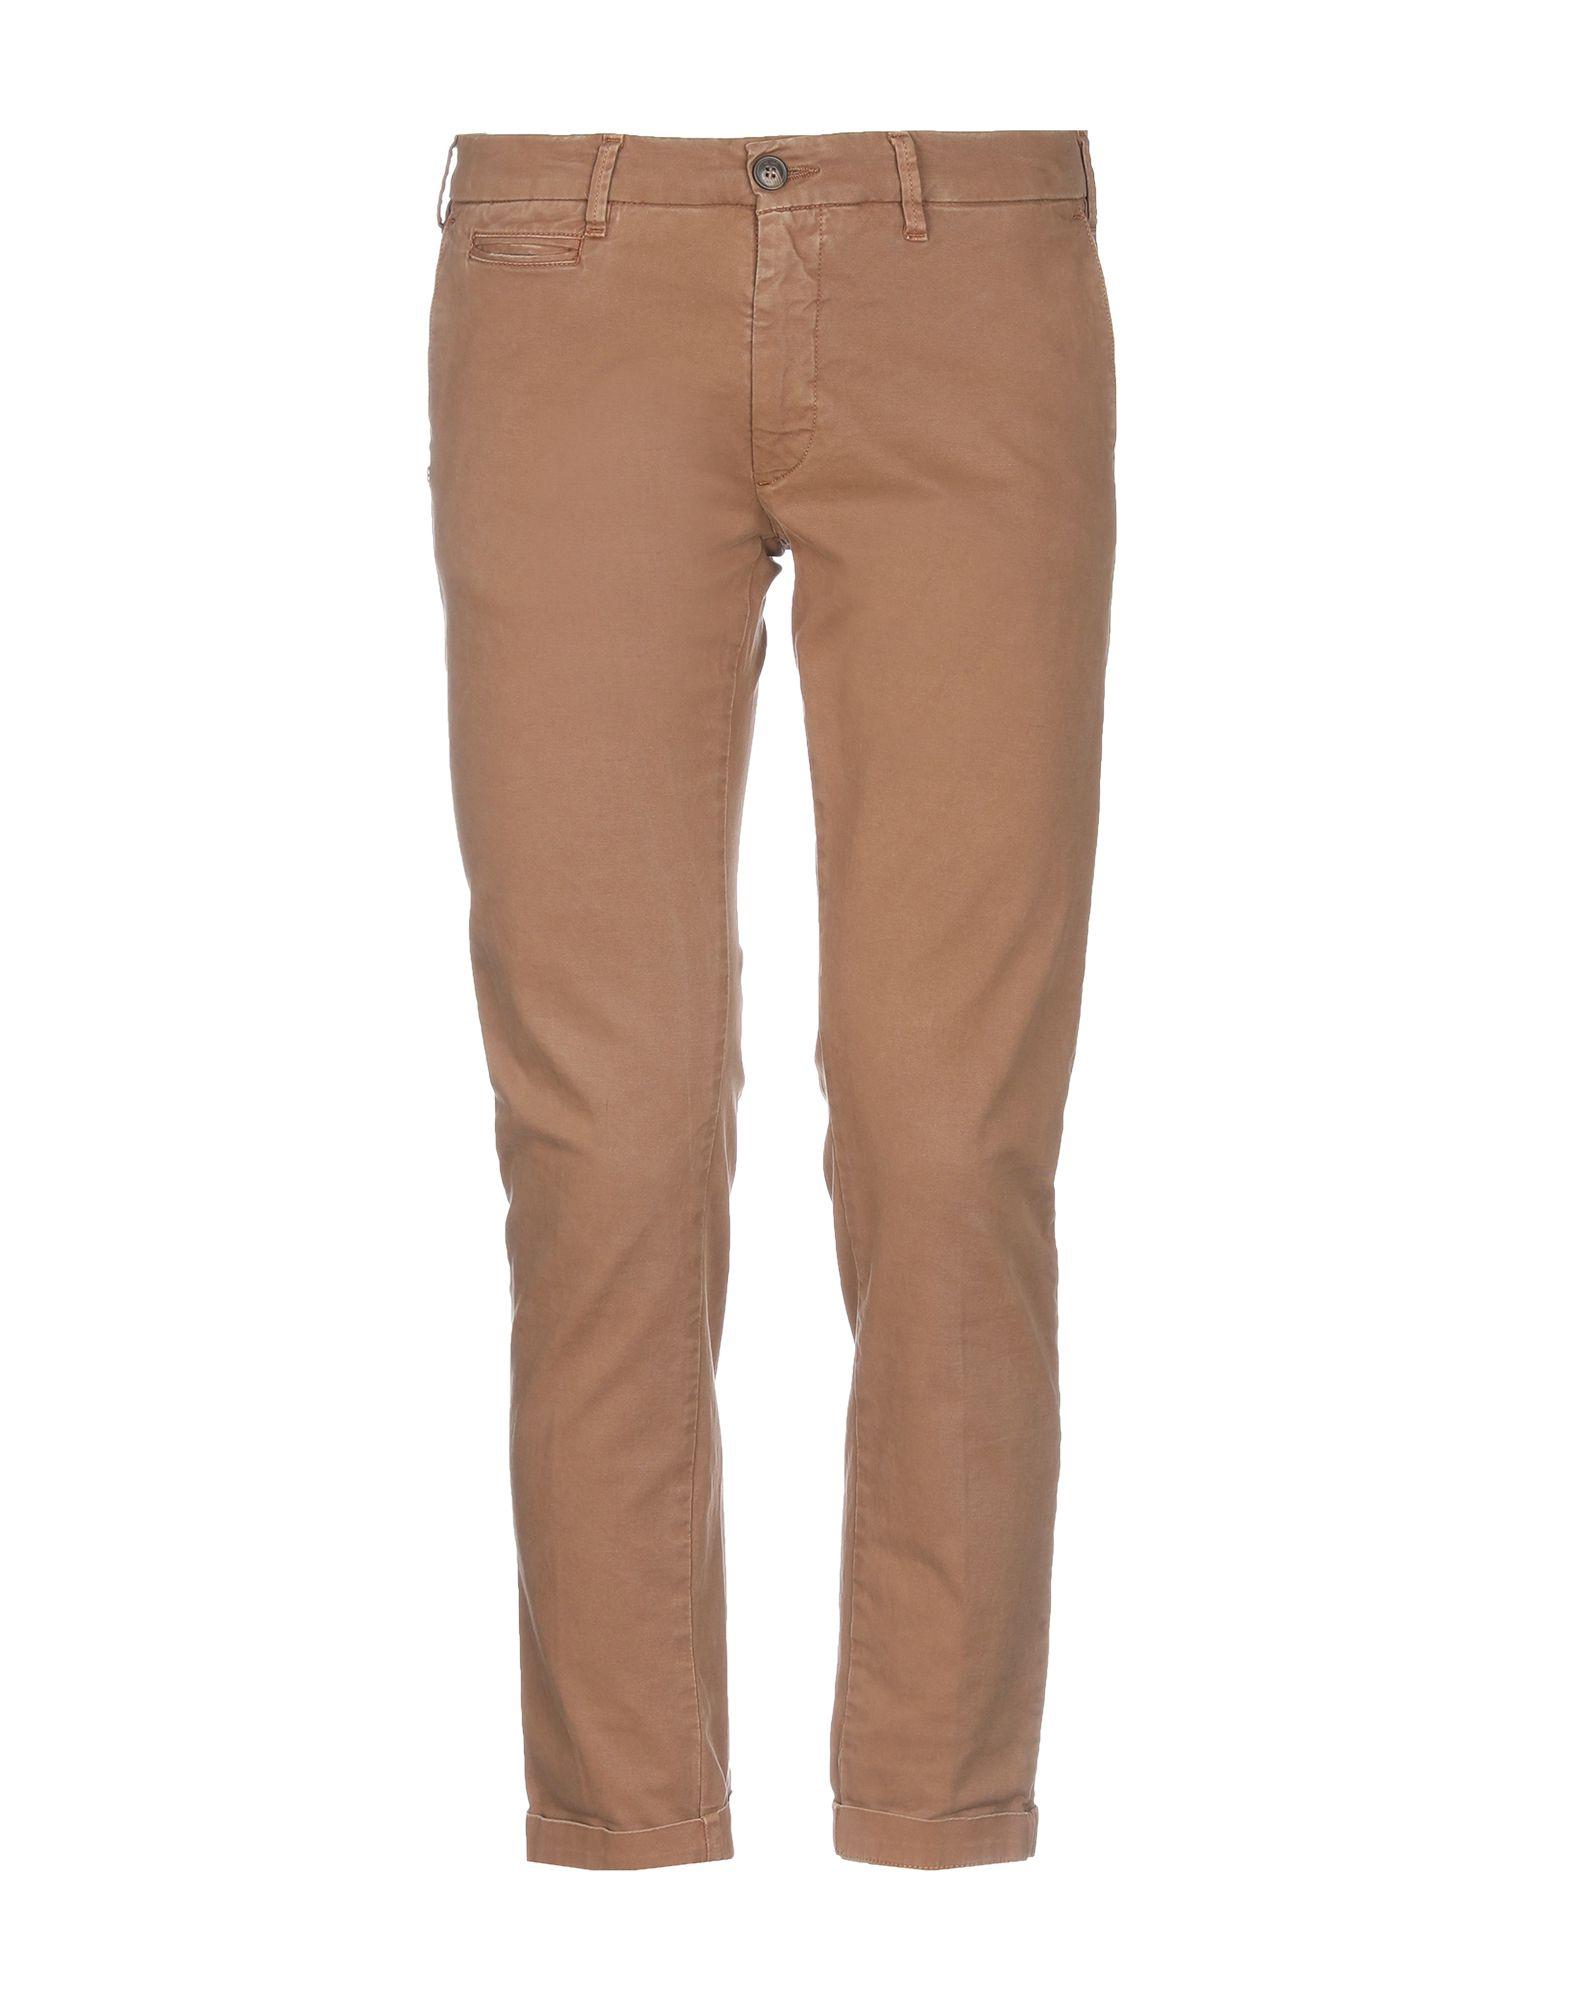 40weft Cotton Casual Pants in Brown for Men - Lyst